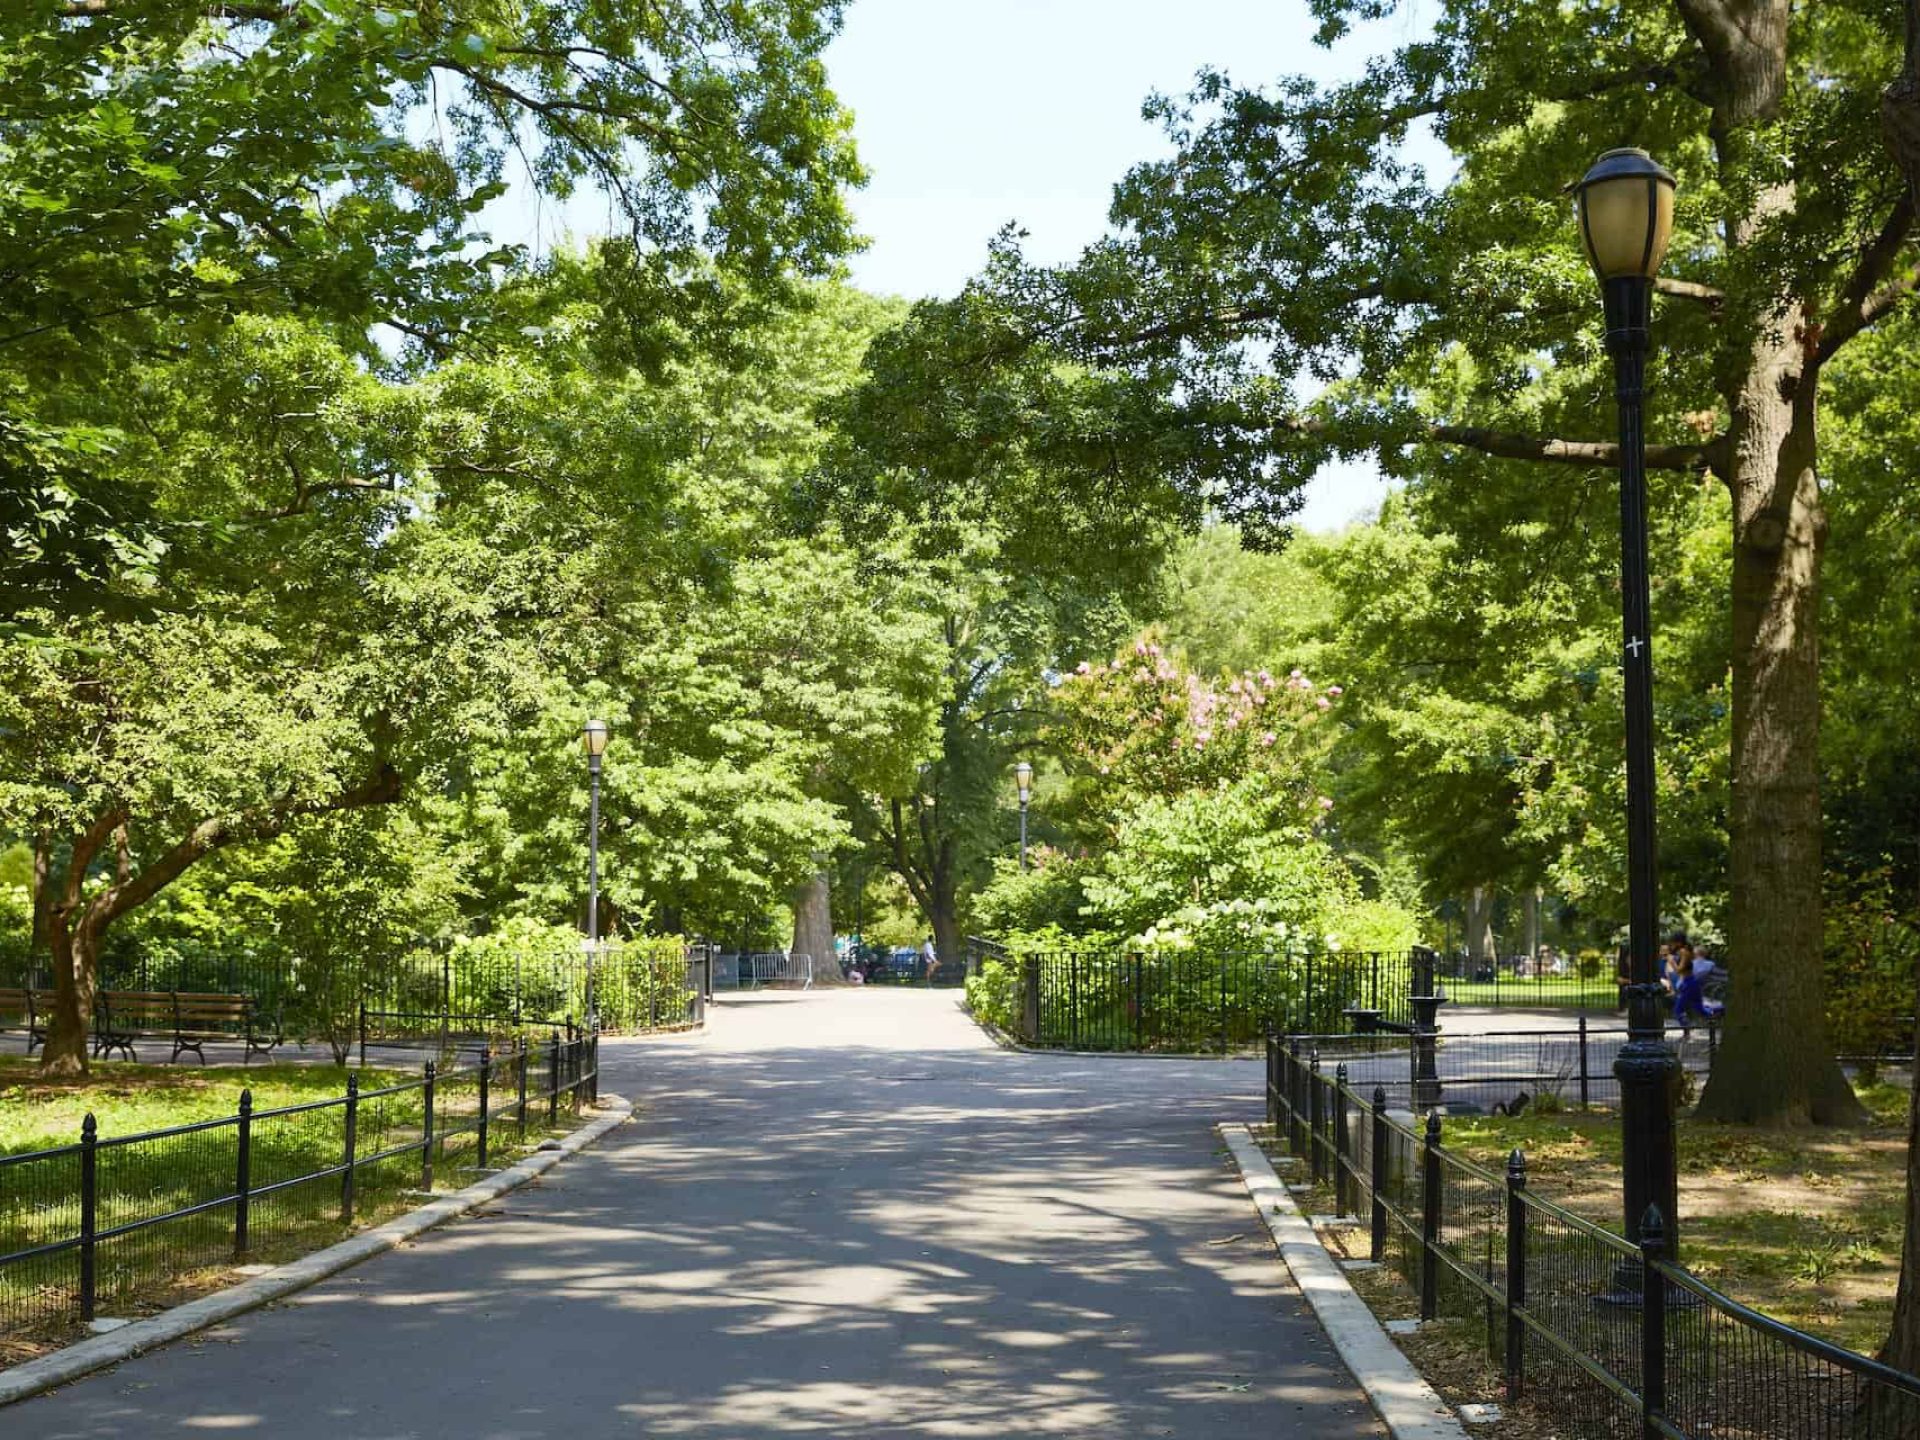 Picture inside a city park in New York. Standing on a paved path looking into the park with benches and tall green trees.